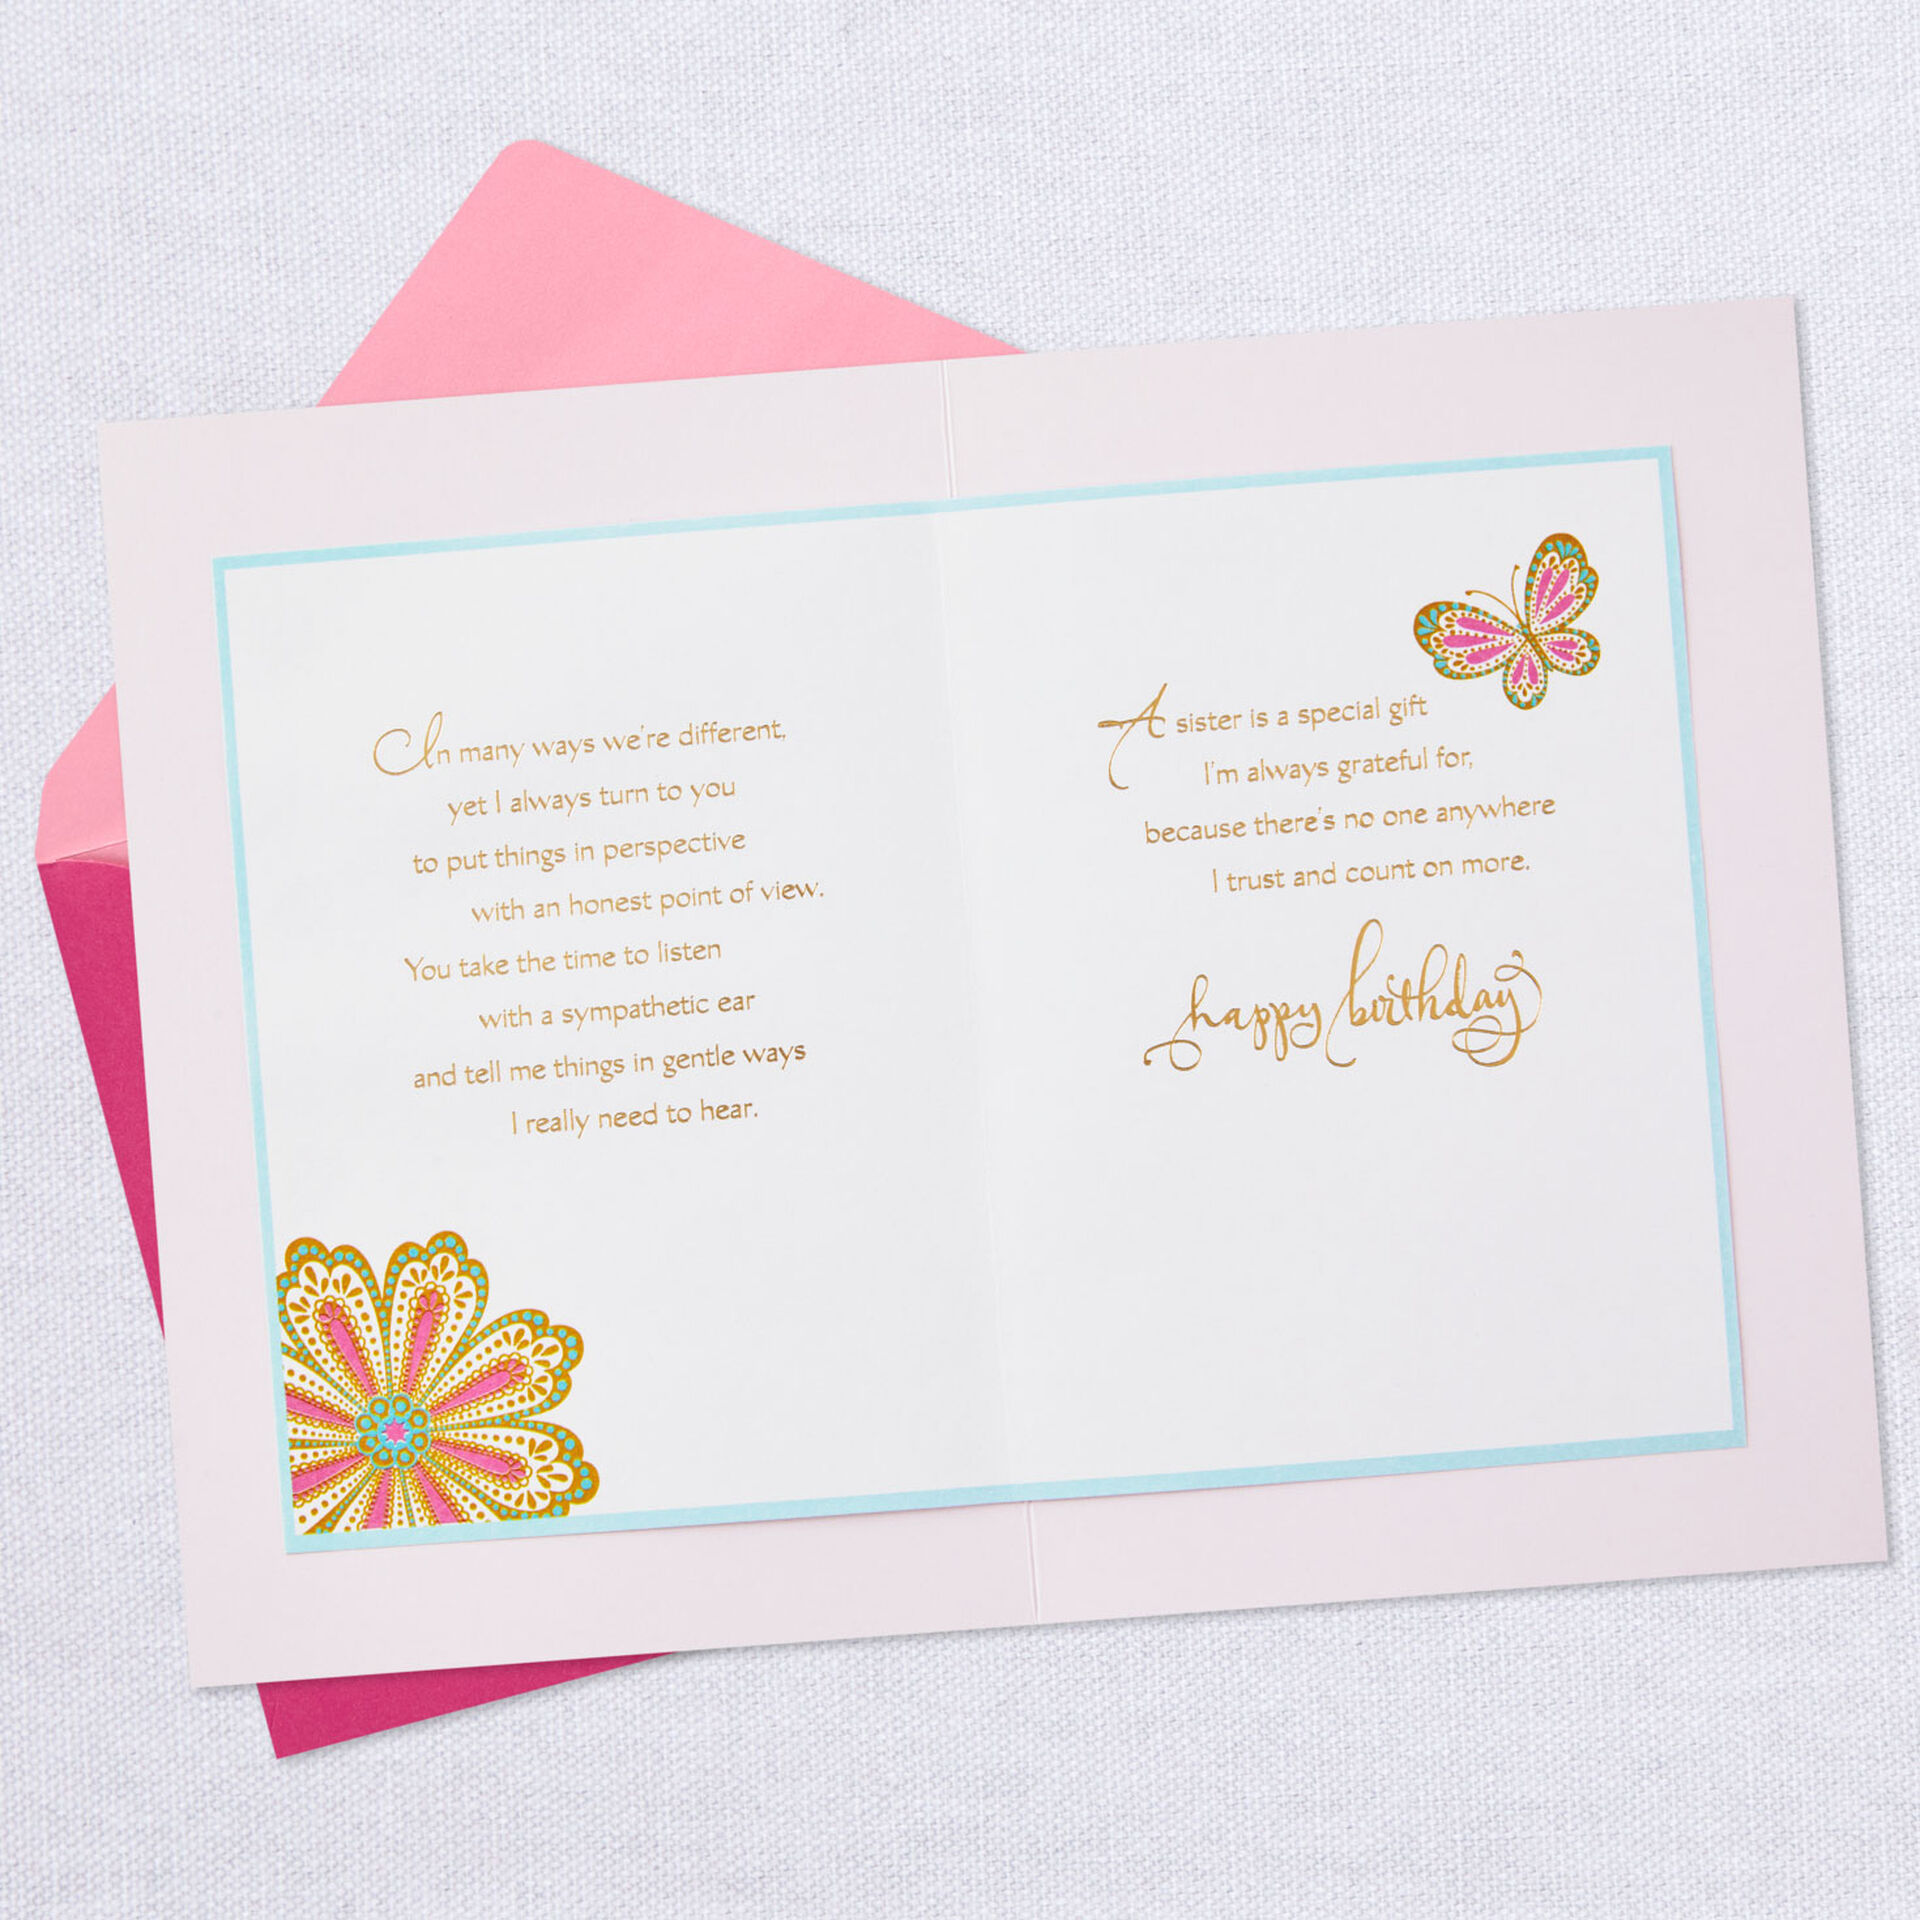 Flowers-and-Butterflies-Birthday-Card-for-Sister_599FBD4595_03